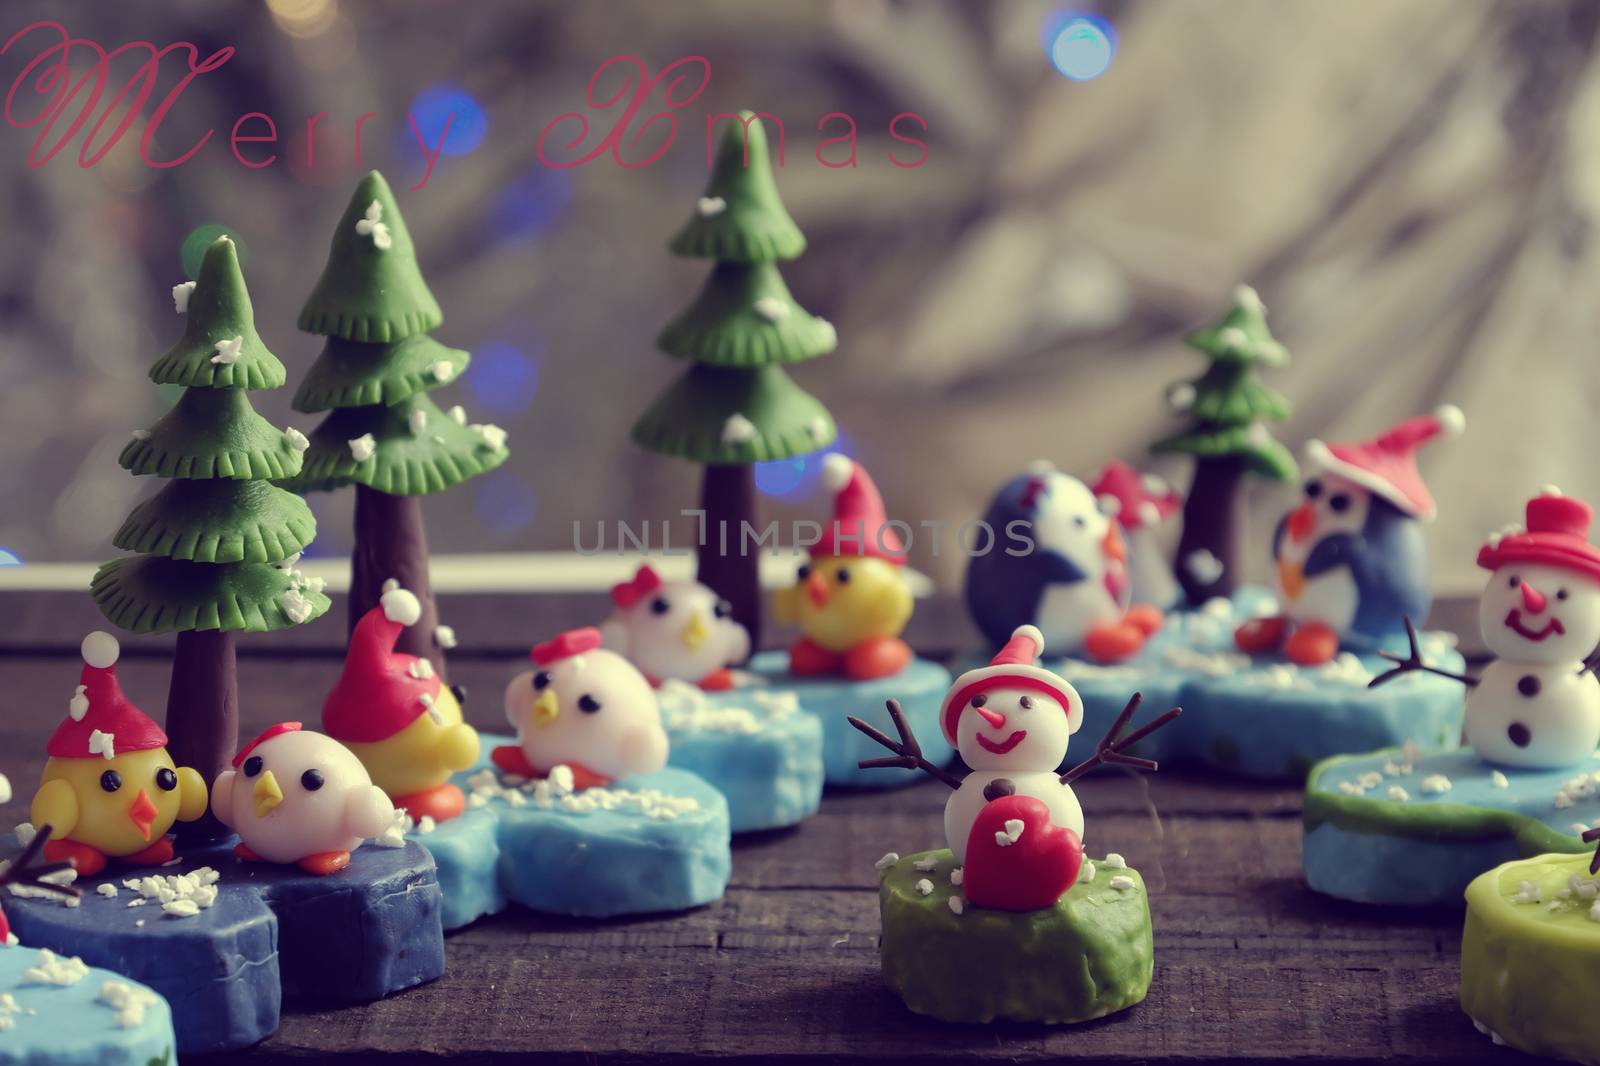 Merry Christmas background and happy new year from abstract handmade art, snowman, owl, bird, christmas tree diy from clay material, wonderful craft to make Xmas ornament for decor in winter holiday